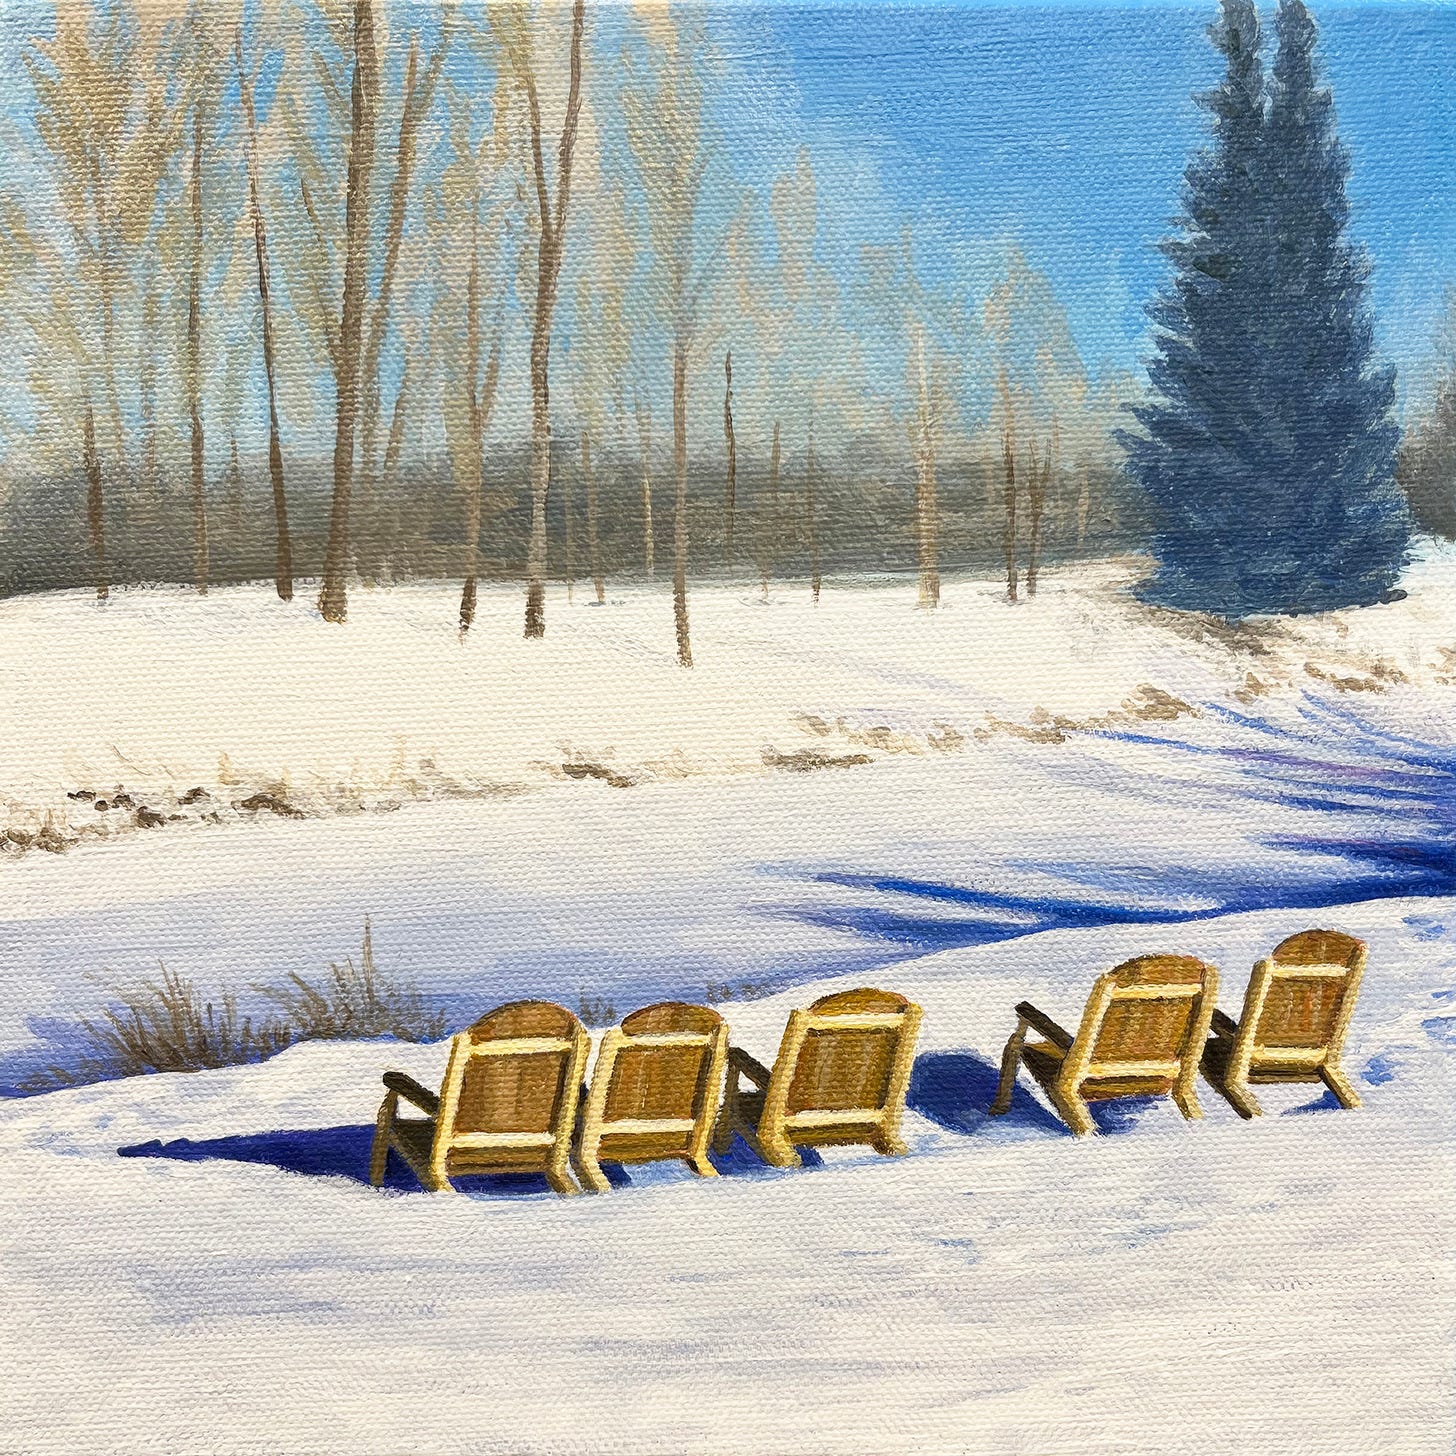 Painting of a winter landscape scene featuring a row of five wooden deck chairs placed alongside a frozen river. Across the river the spindly trees are hazy and barren save for a pair of blue-green evergreens on the bank to the right.